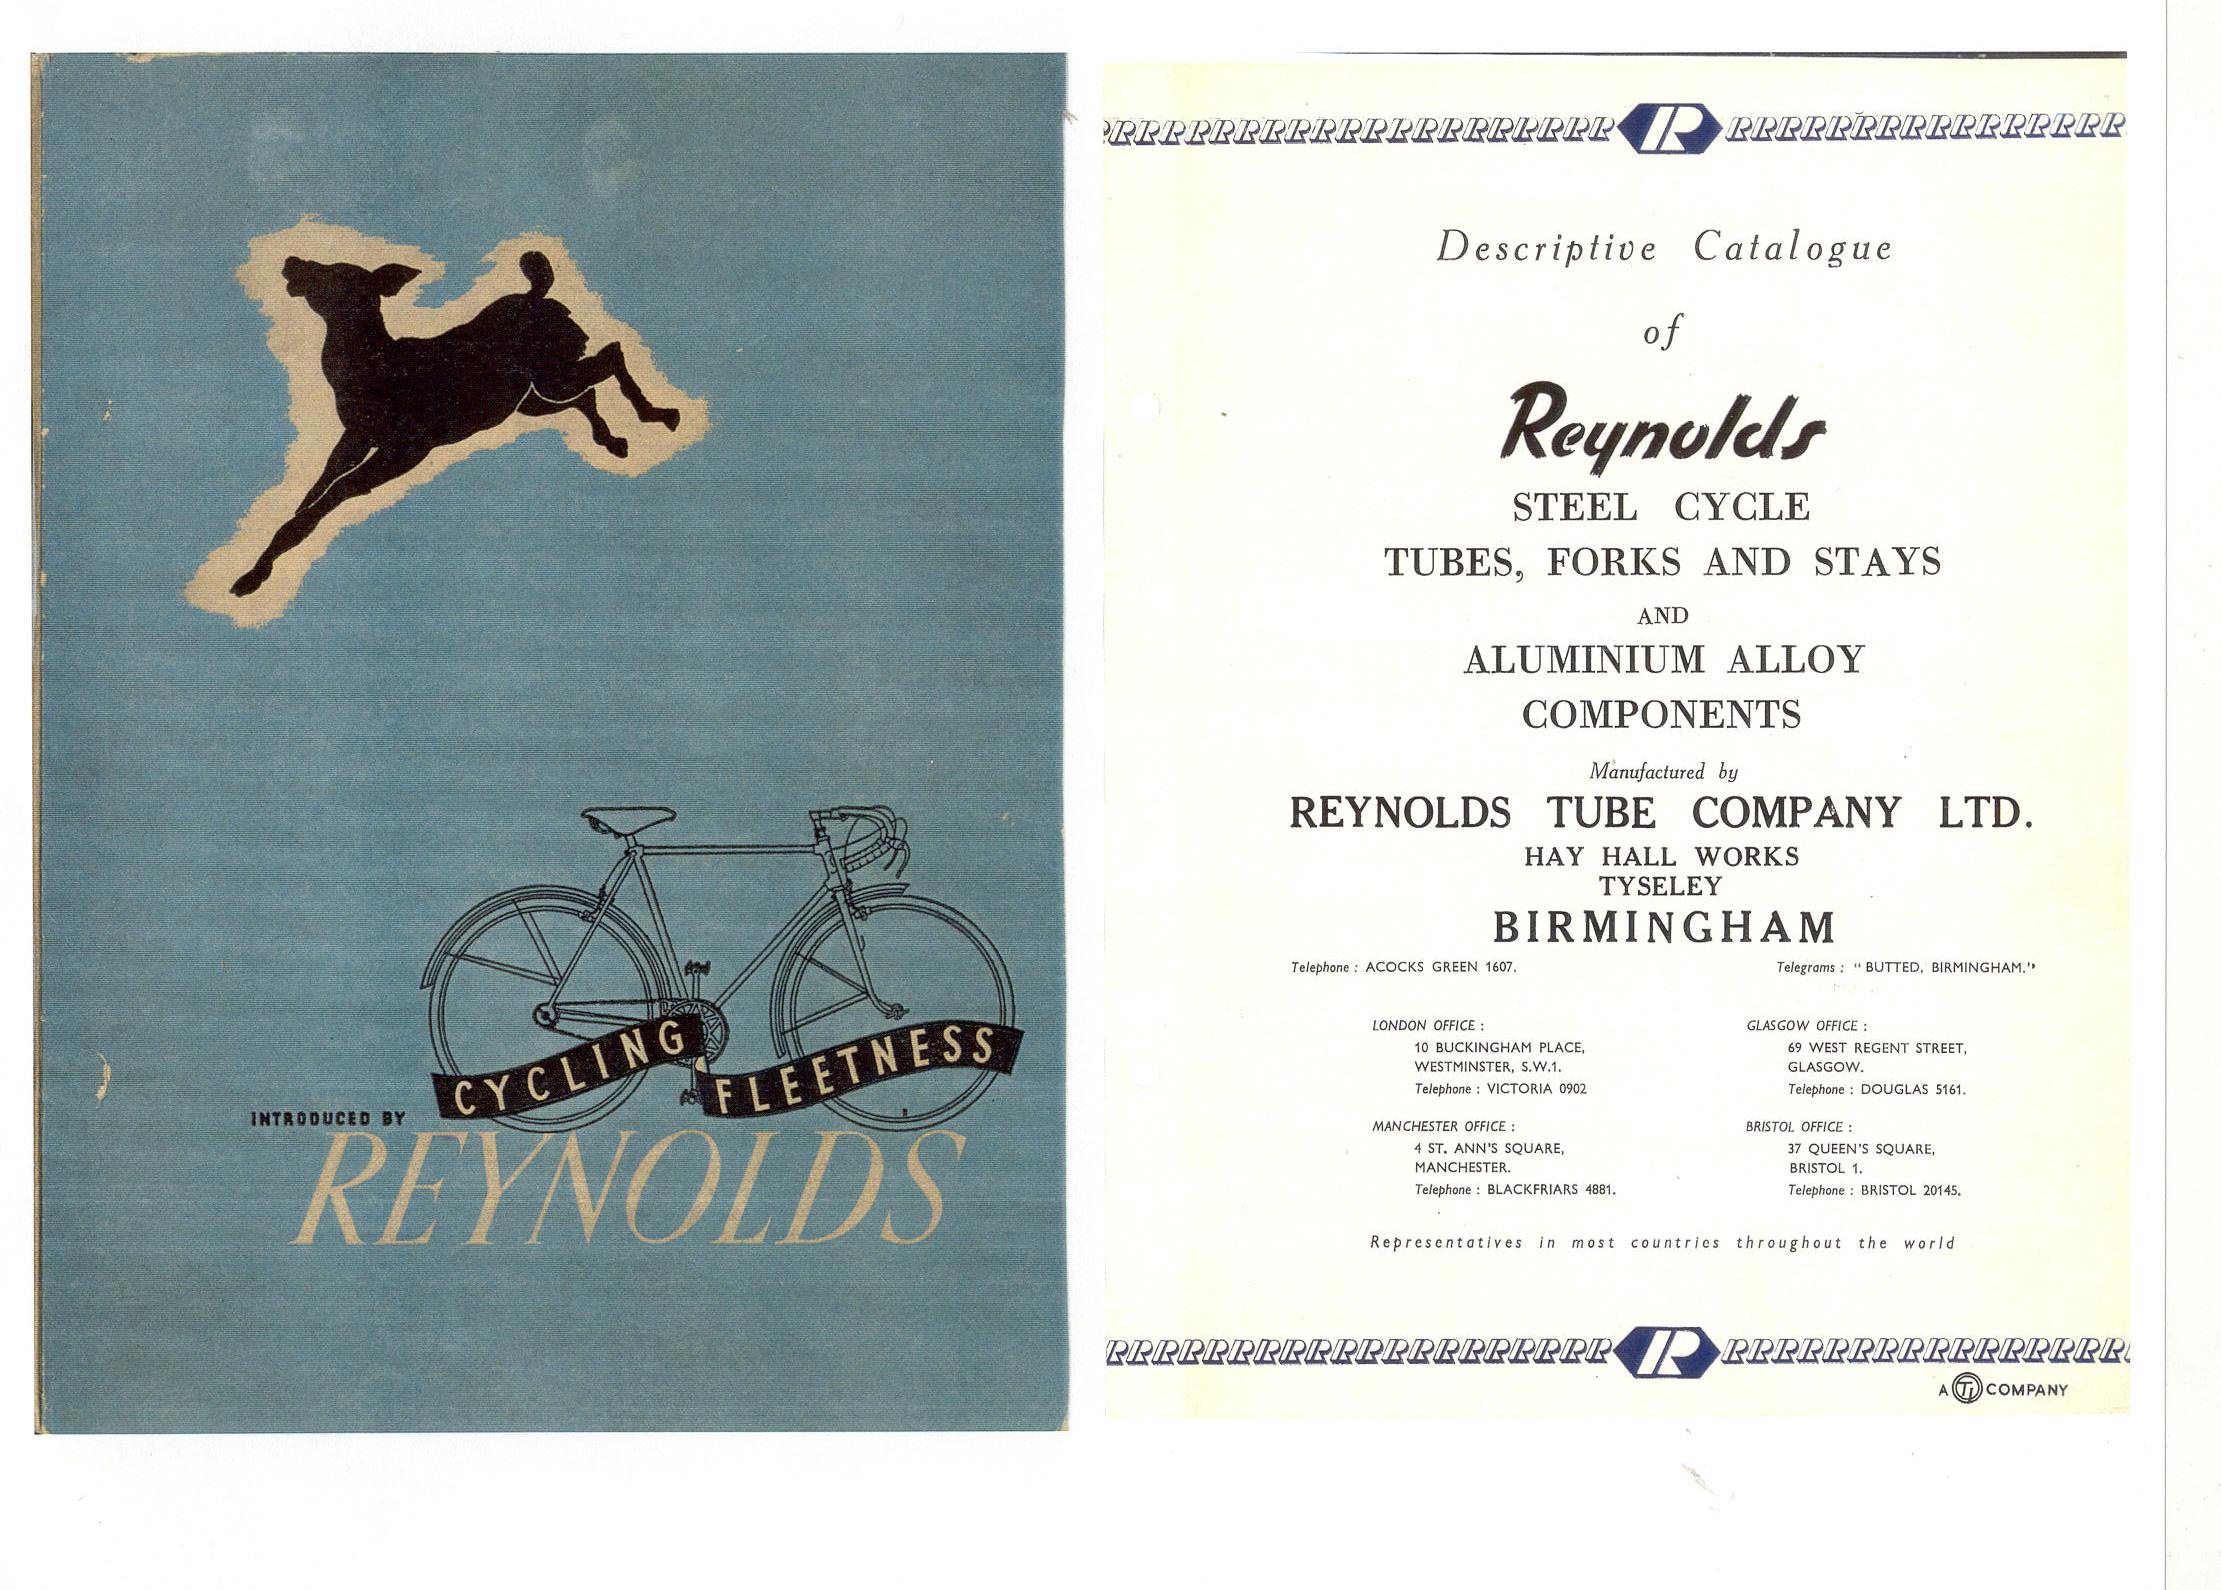 REYNOLDS TRADE-CATALOGUE-COVER-C1920.  We just received a number of historic pieces of Reynolds trade brochures which will soon be featured on the Torch and File website.  Here is one from 1920.